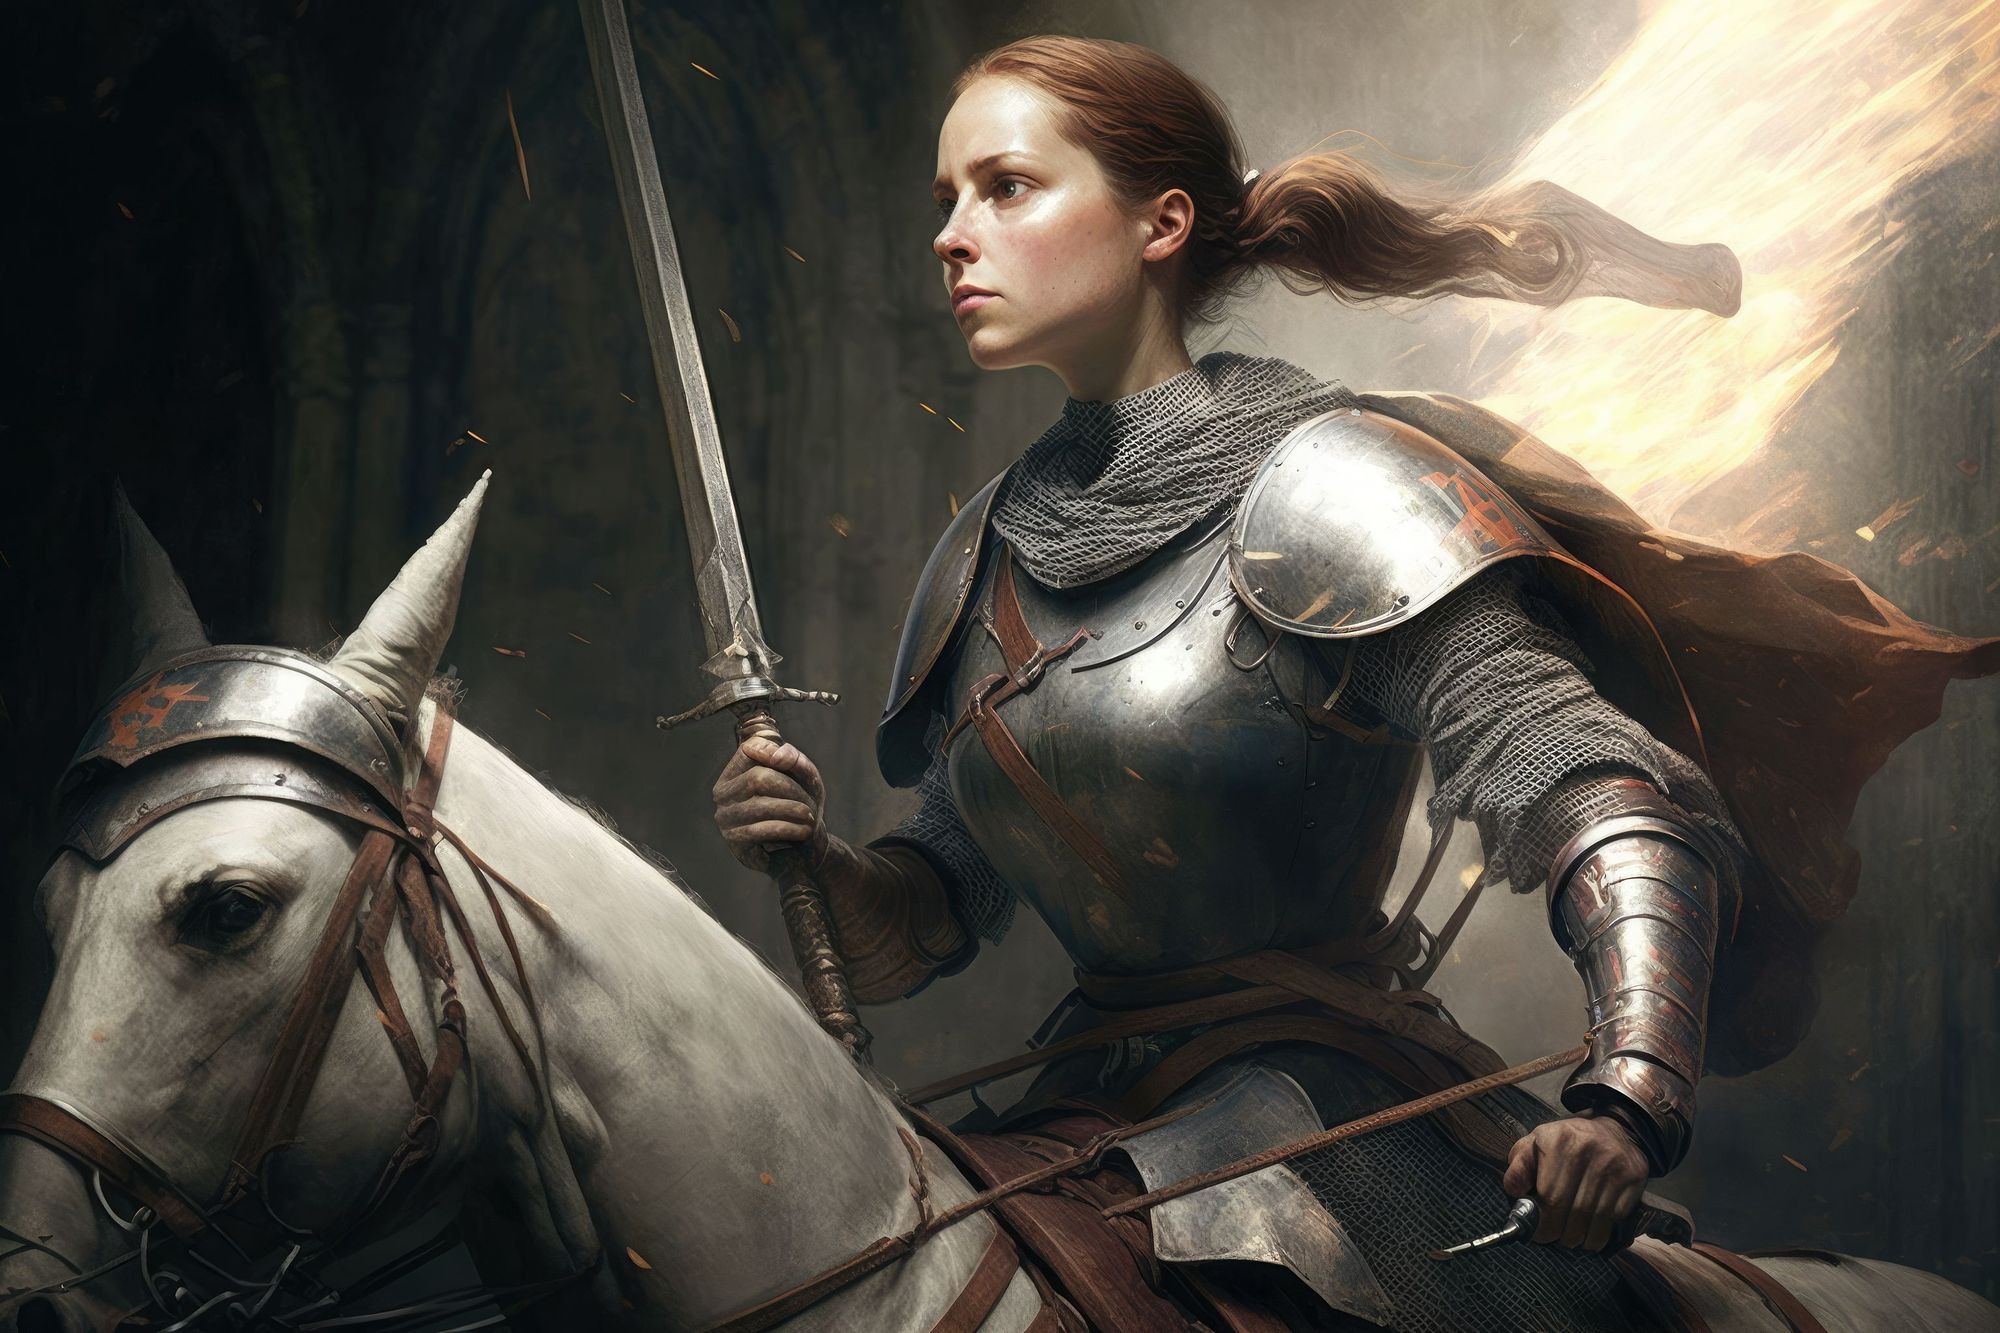 An illustration of Joan of Arc on horseback, brandishing a sword and wearing armor, ready to lead the charge into battle